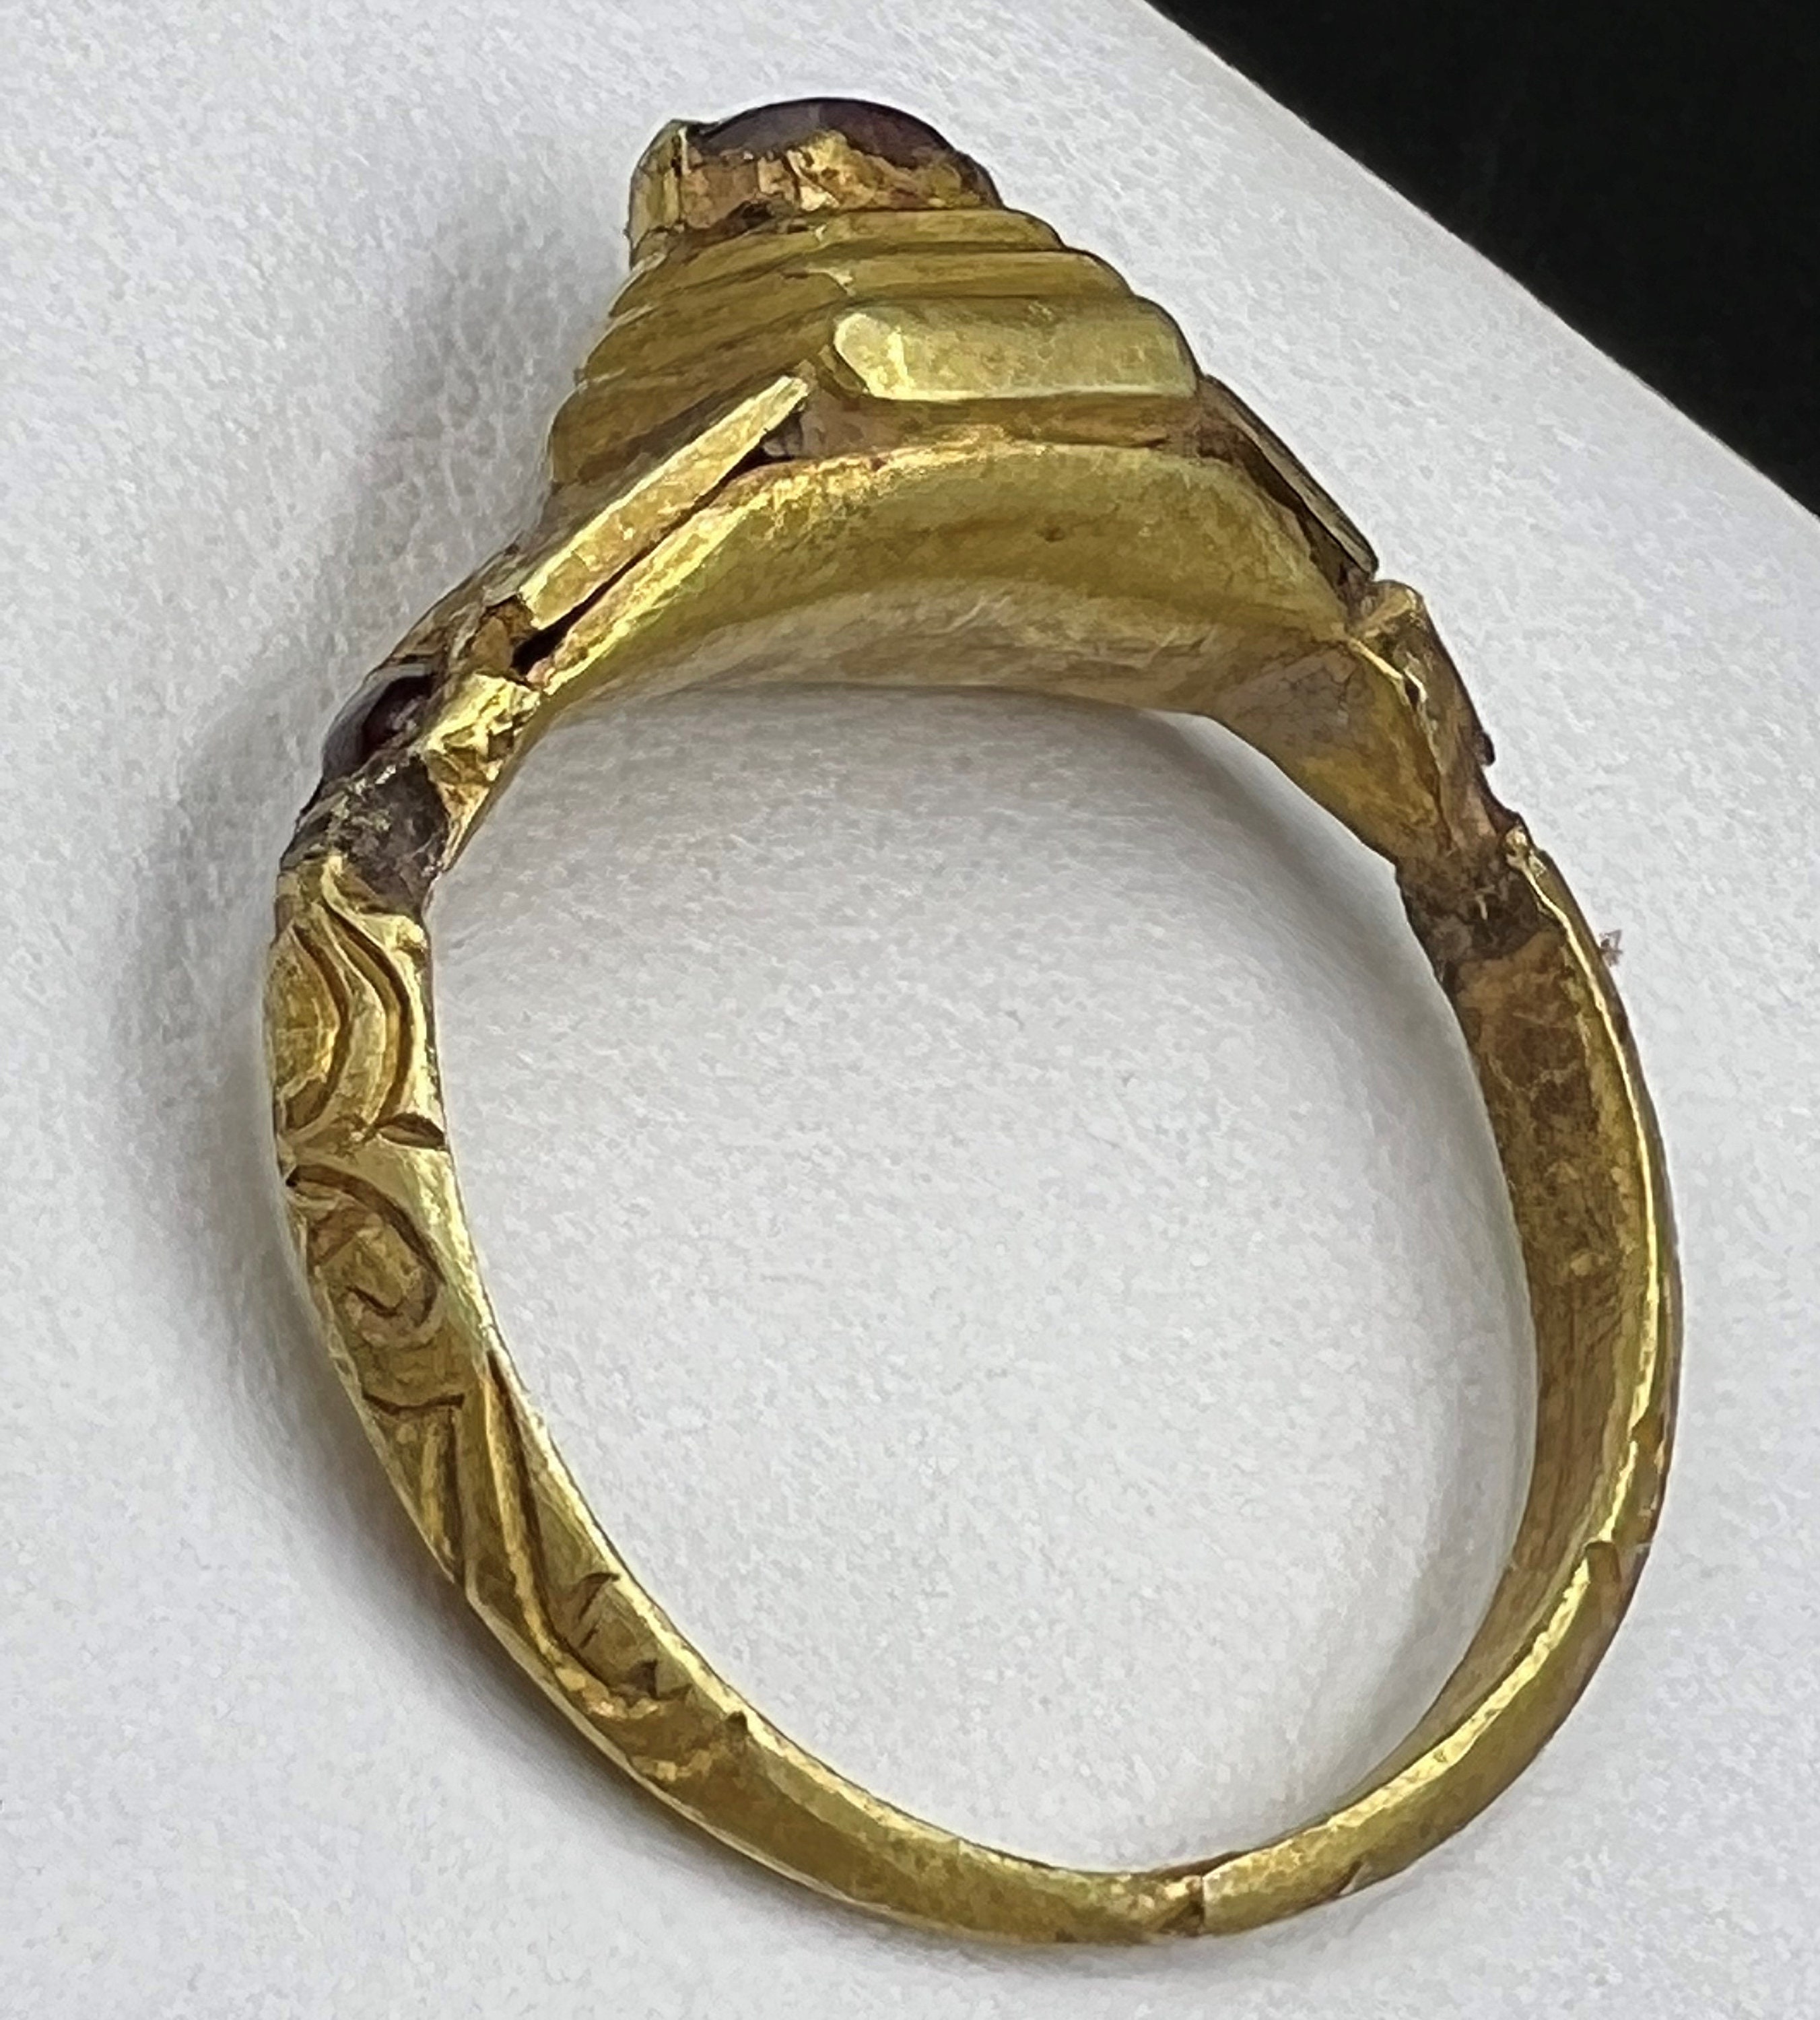 Antique South East Asian Art Vintage Gold Gems Jewelry Hand Made Gold Ring